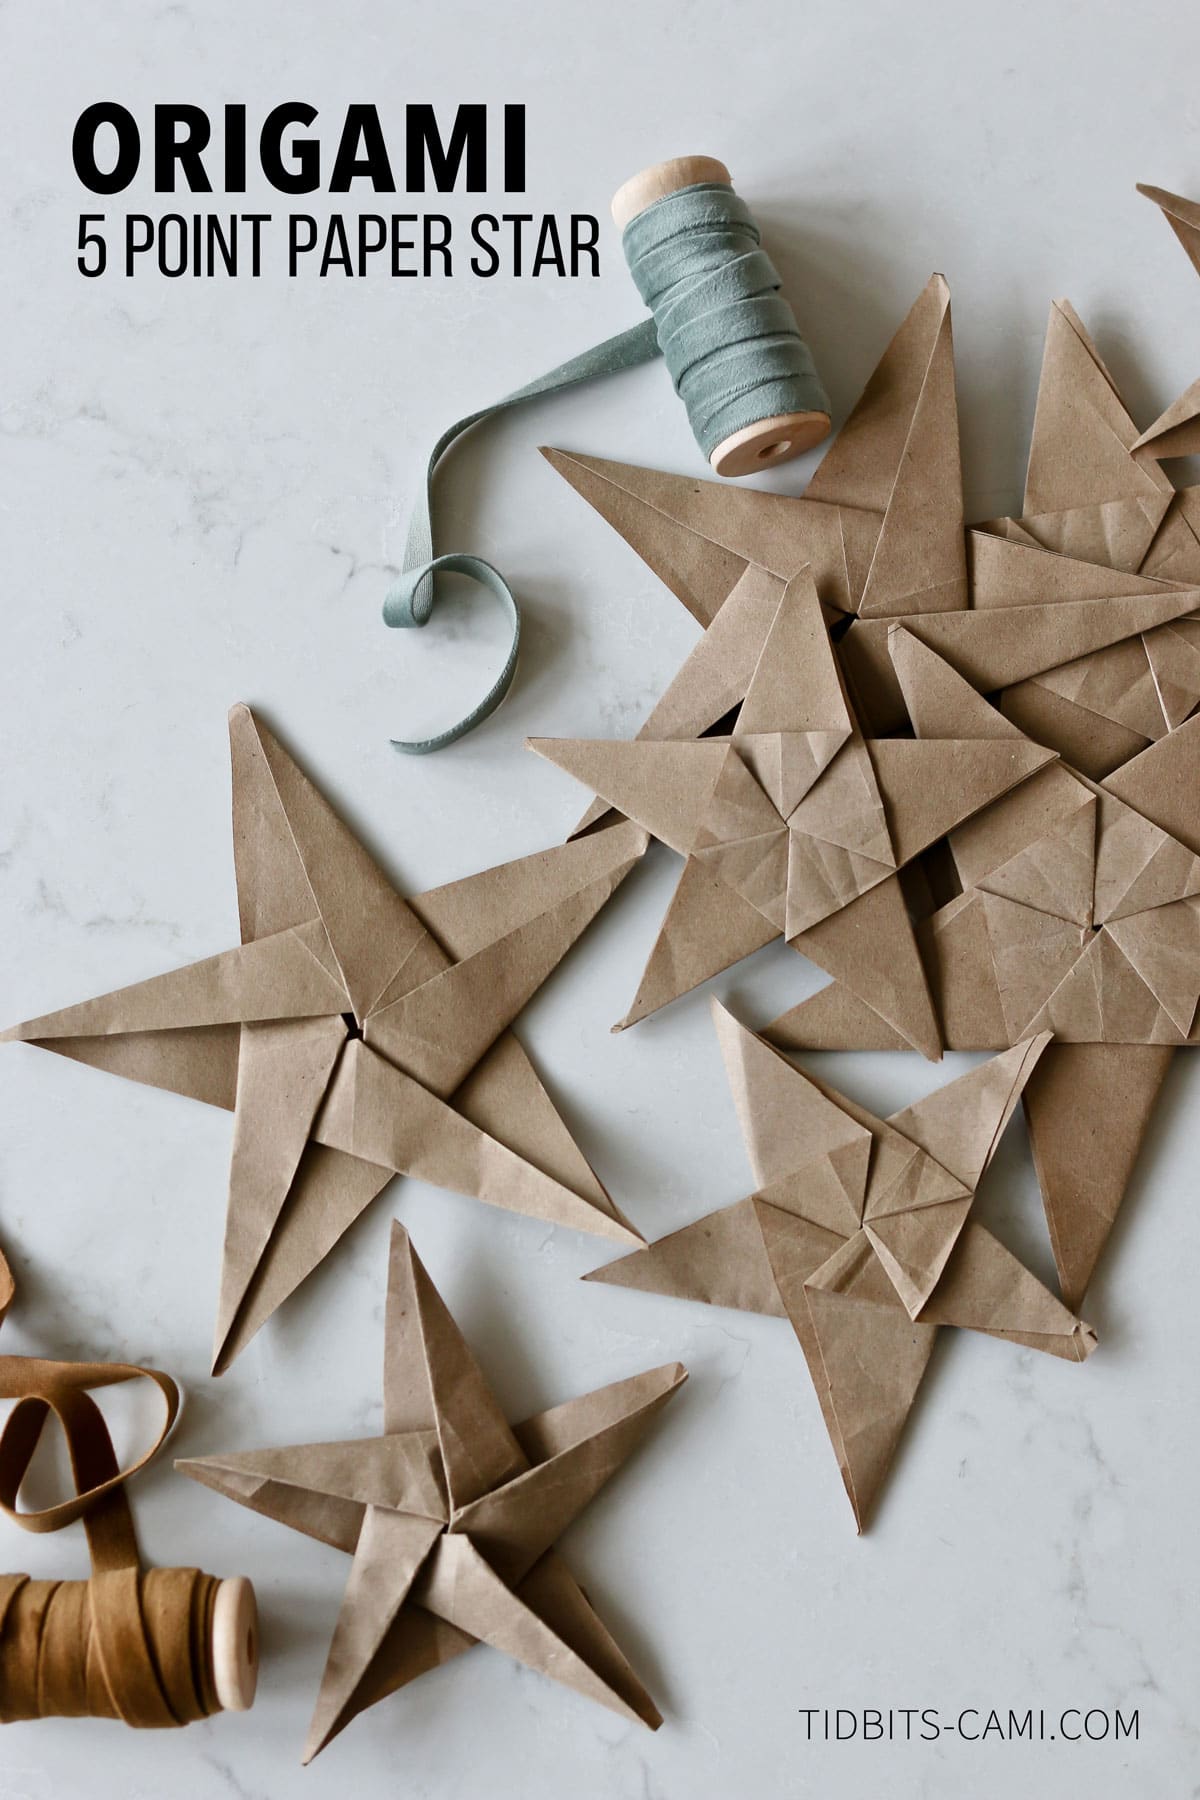 5 point paper origami star step by step instructions